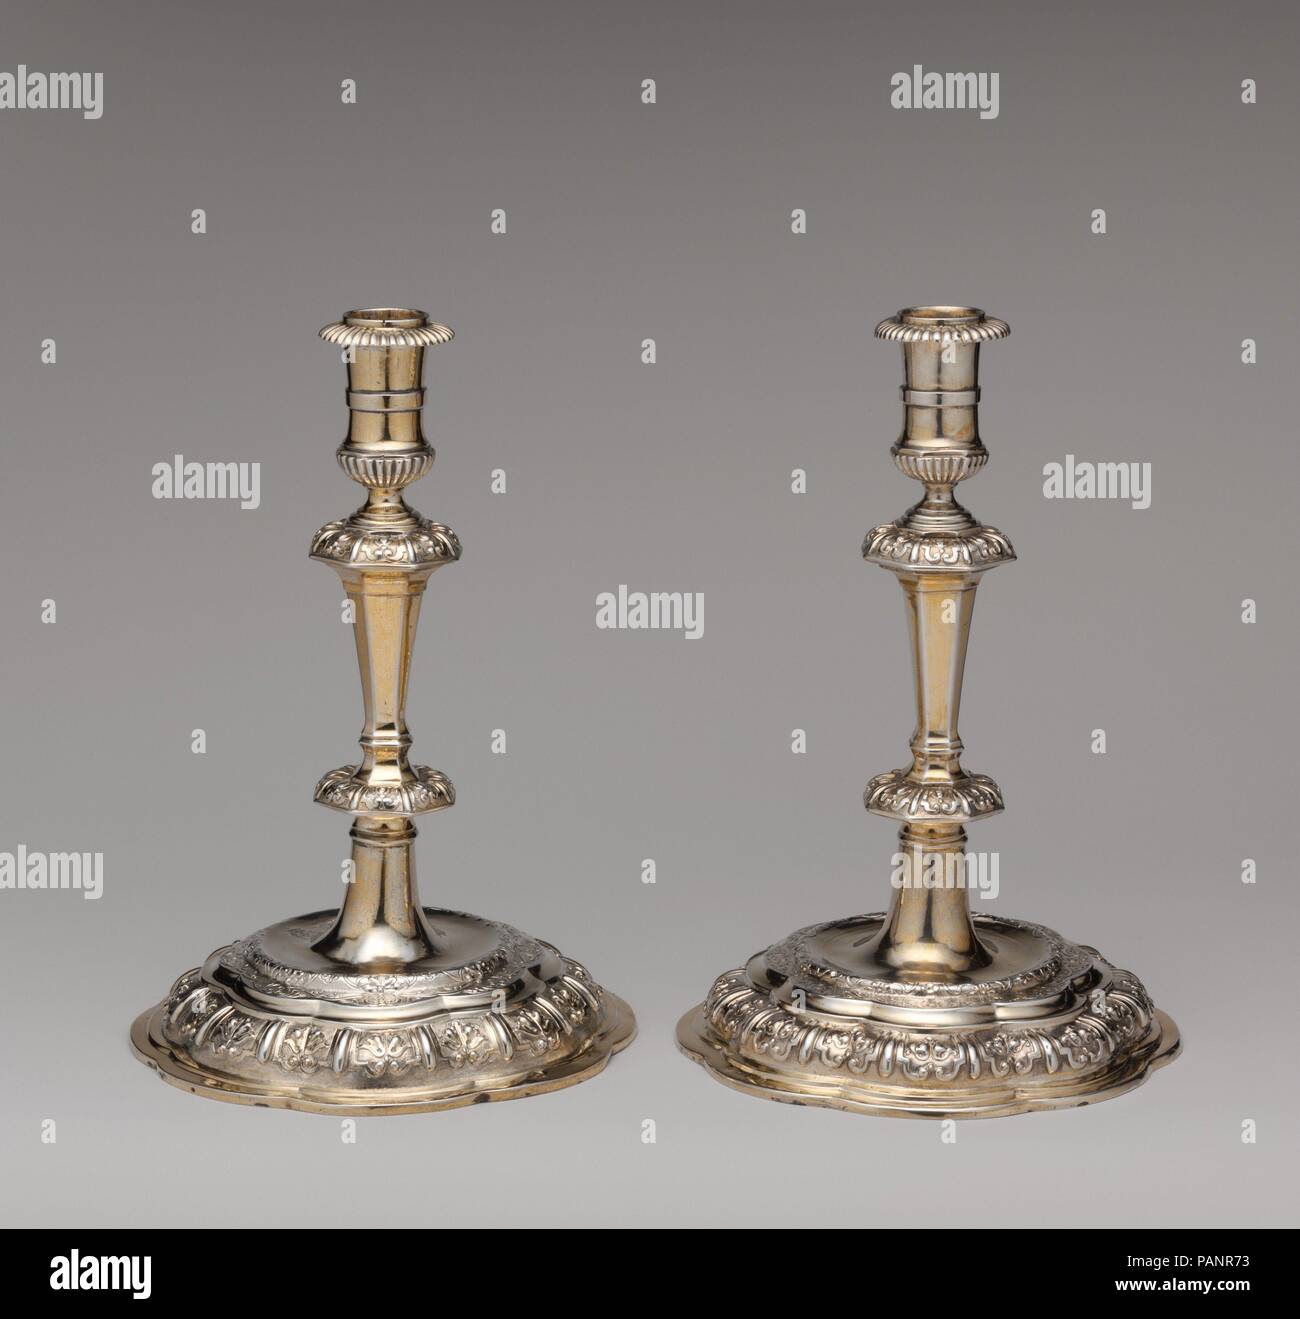 Candlestick (one of a pair). Culture: Swedish, Uppsala. Dimensions: H. 8 1/2 in. (21.5 cm.); D. standing 5 3/4 in. (15 cm). Maker: Master 'RW' (Swedish, Upsala, early 18th century). Date: ca. 1710-20.  Early-eighteenth-century Swedish silver of such a commanding quality is exceedingly rare. These refined candlesticks reflect the stylistic adaptations and the high standard of craftsmanship of the master gold- and silversmiths in Uppsala, a northern European university town. The objects' delicate ornamental vocabulary constitutes an elegant and refreshing version of what could be defined as a Sw Stock Photo